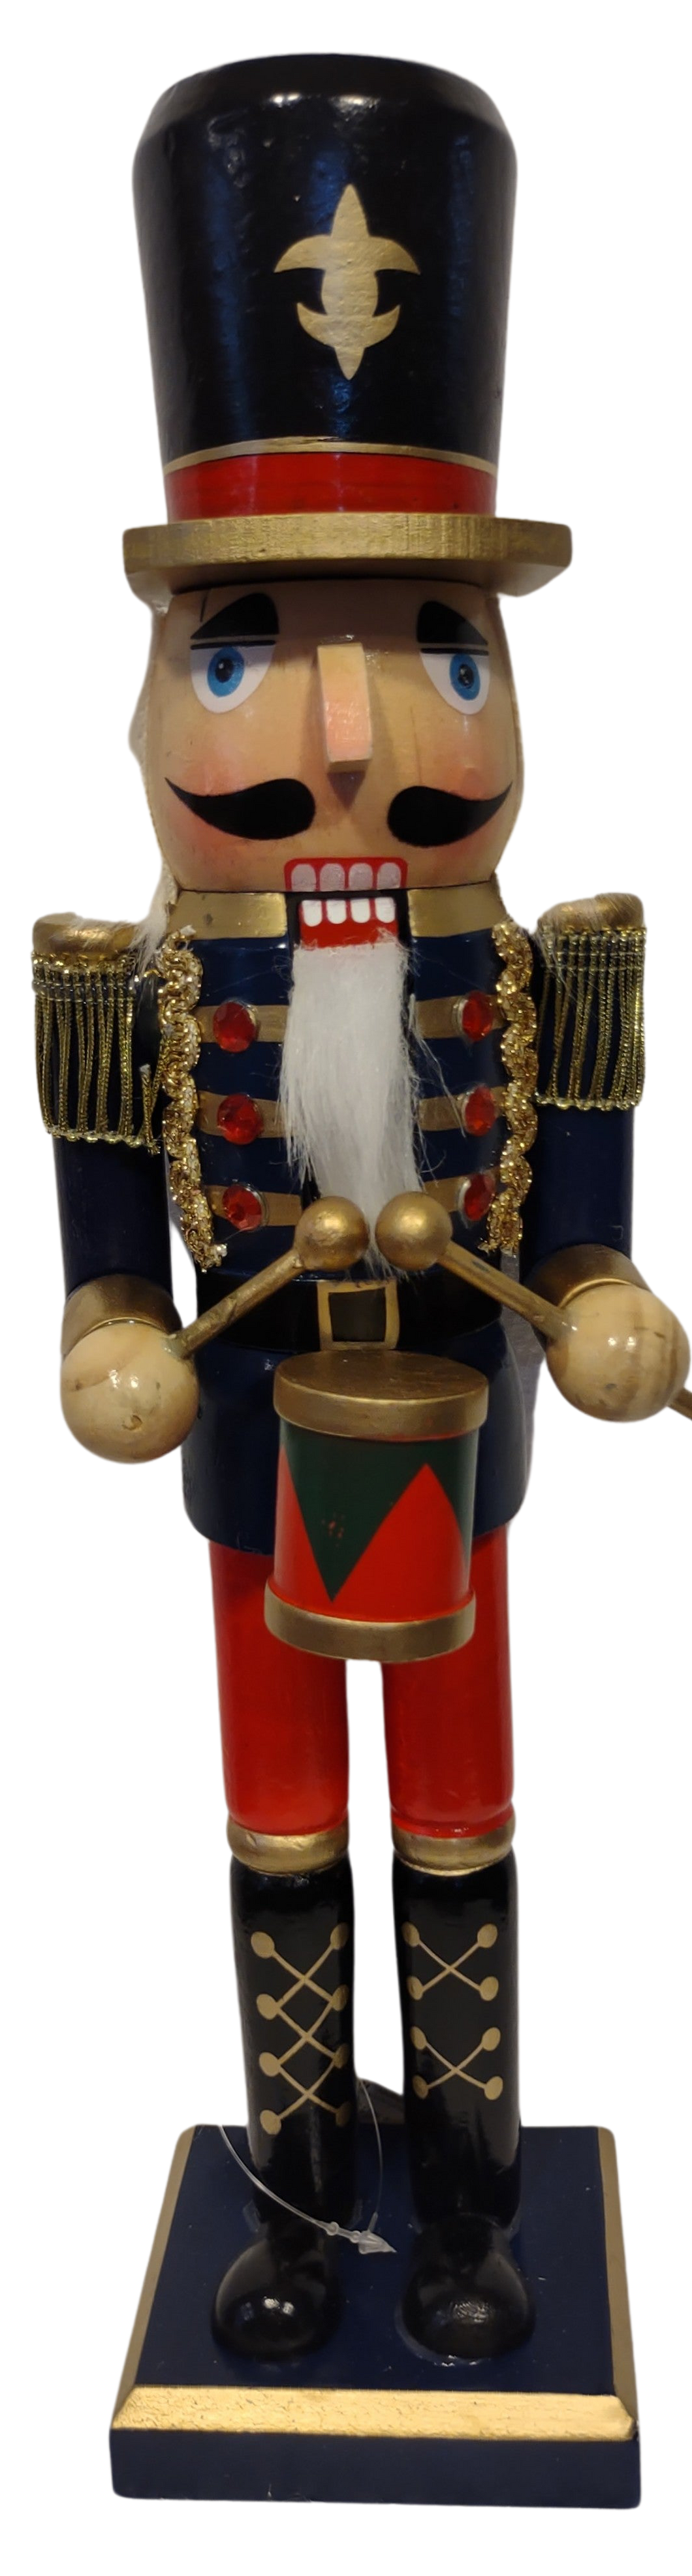 Wooden Royal Nutcracker Blue/Gold/Red with Black Hat & Drum 15